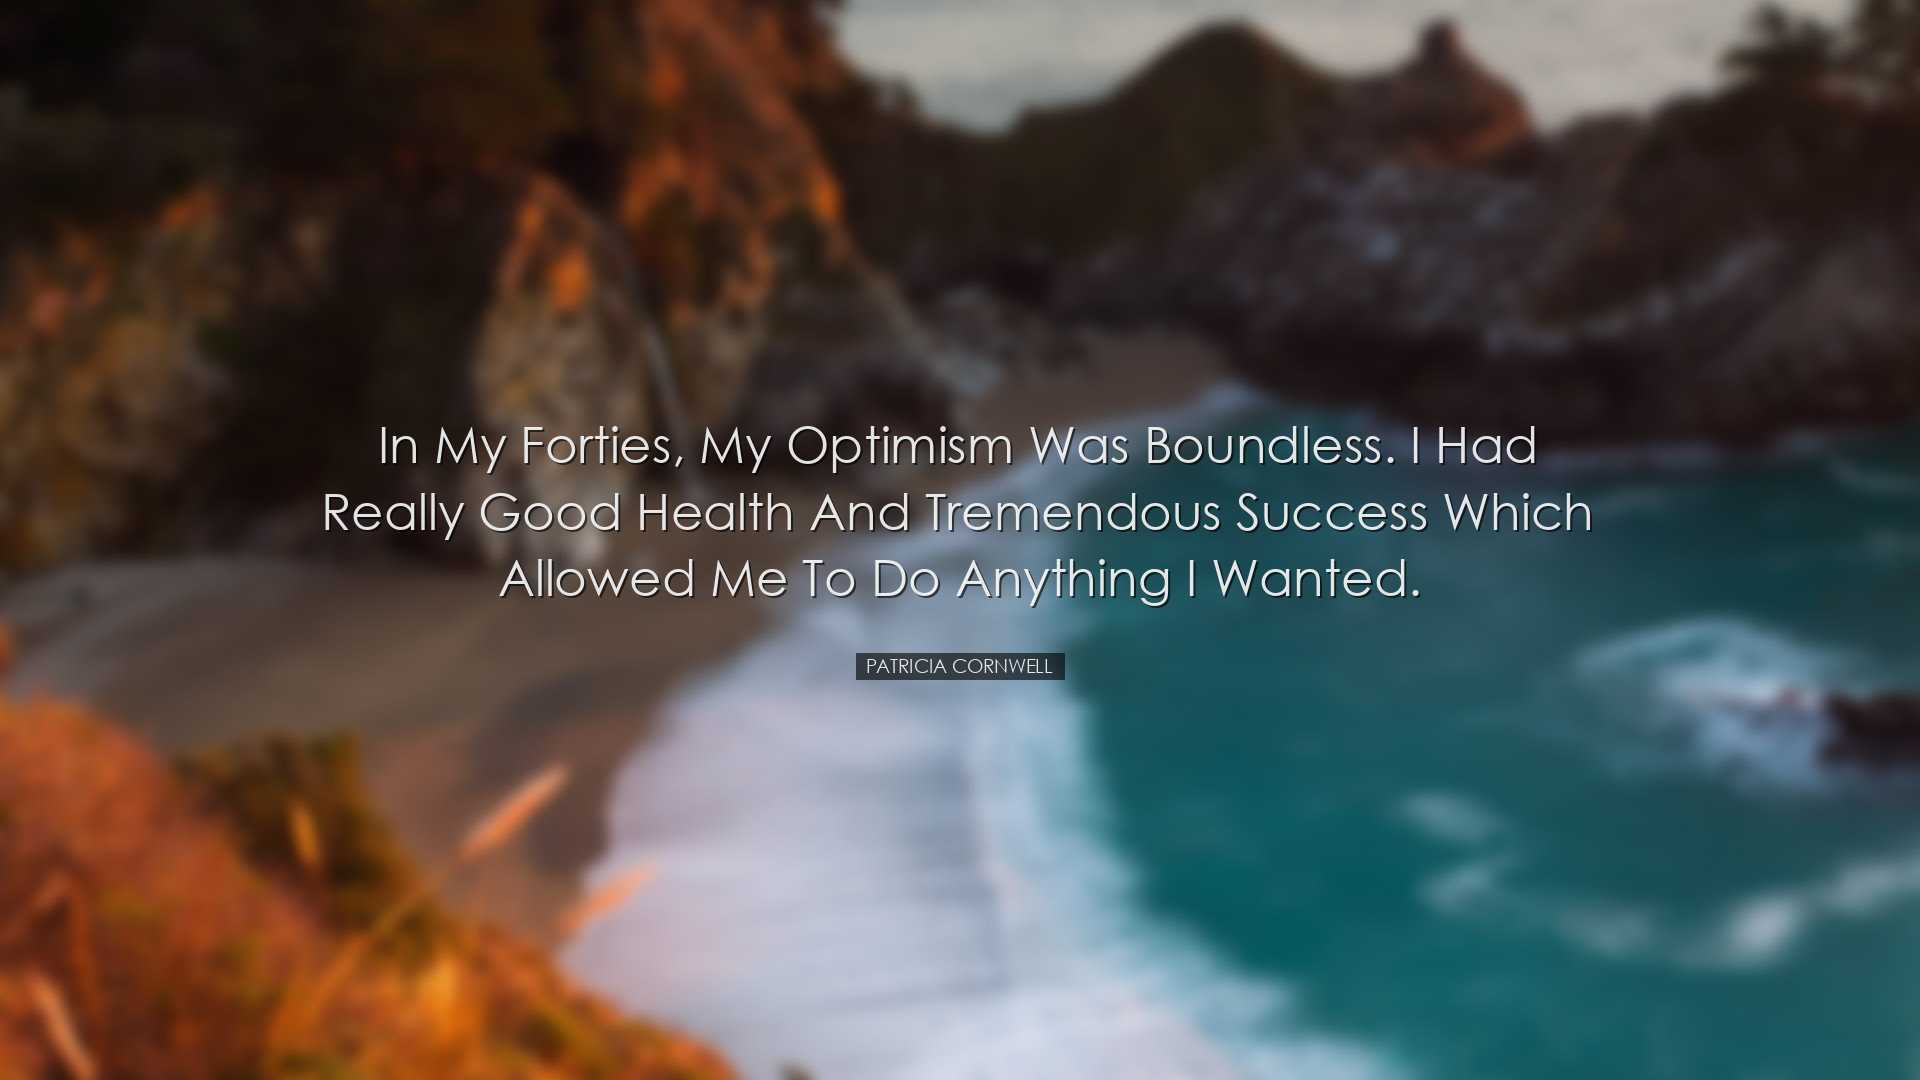 In my forties, my optimism was boundless. I had really good health